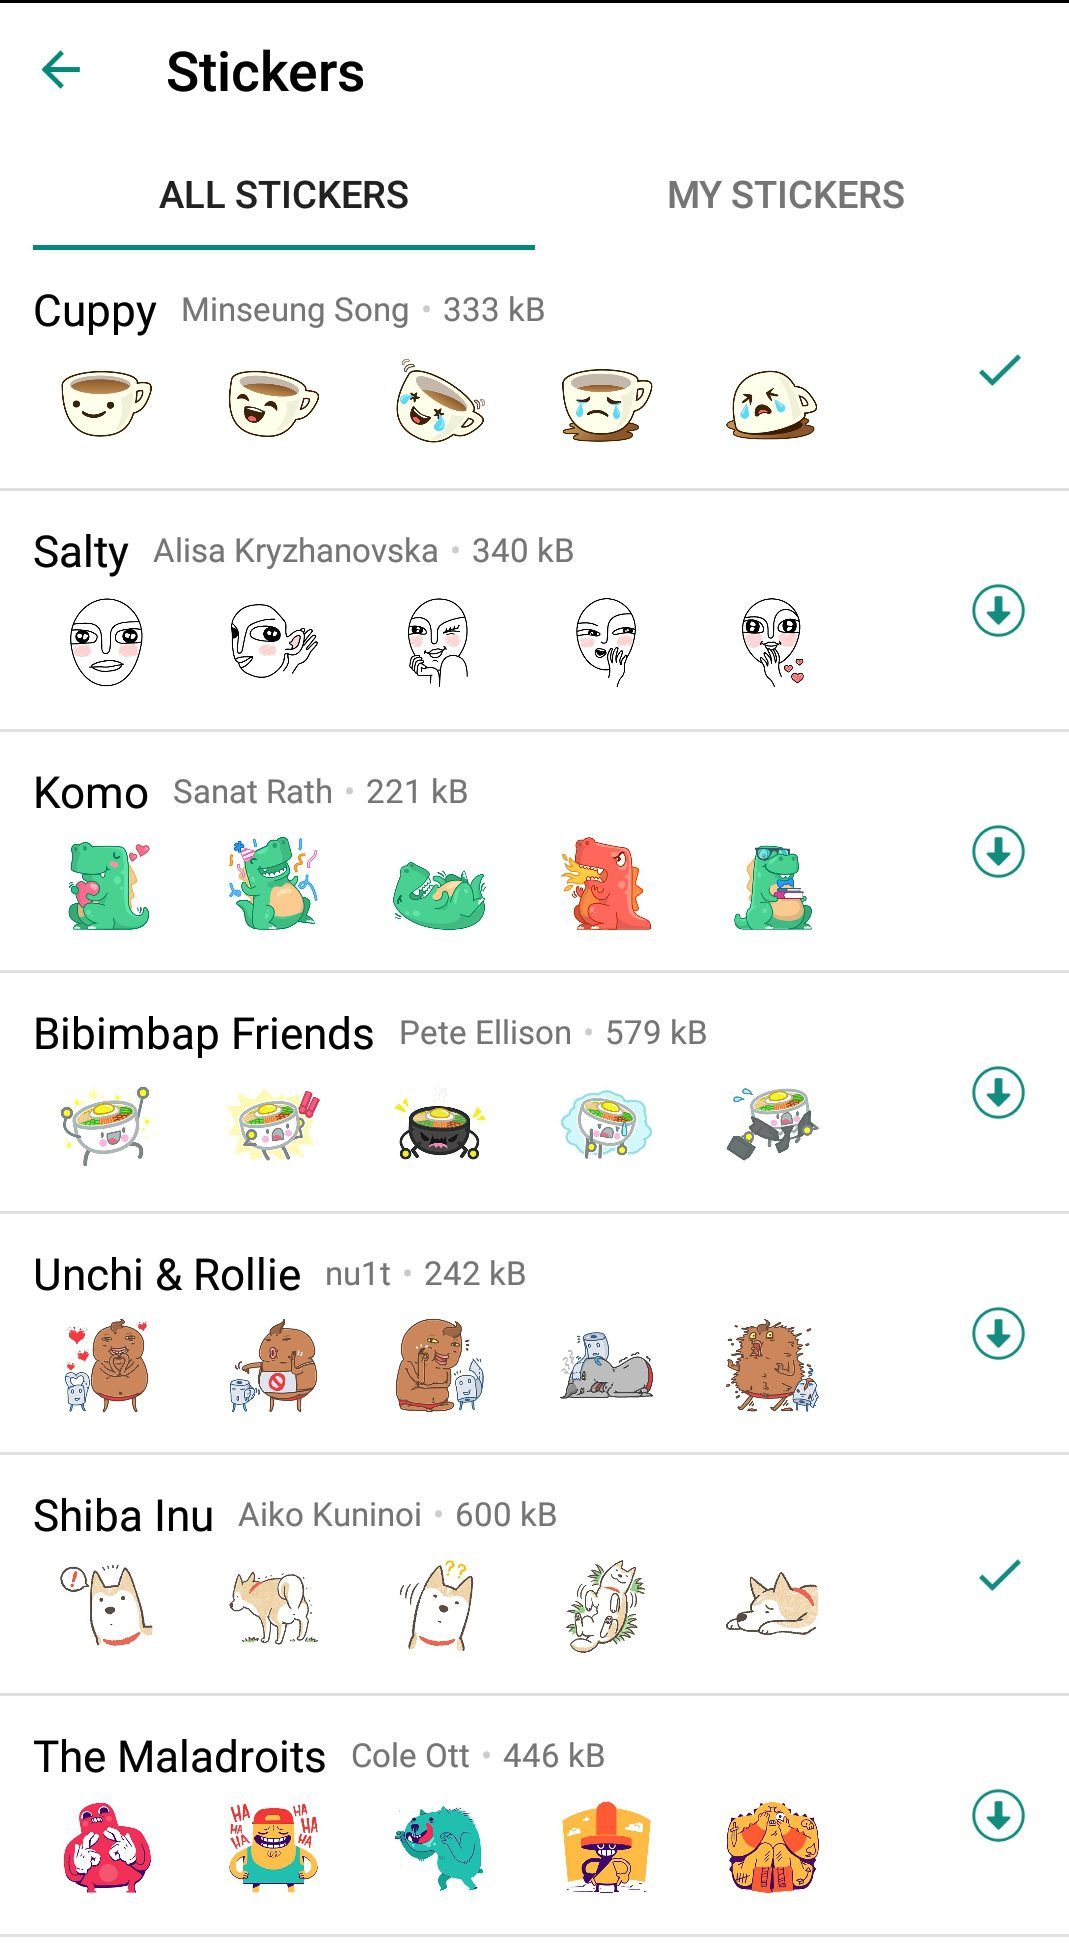 WhatsApp Stickers Begin Roll Out to iOS Android Users